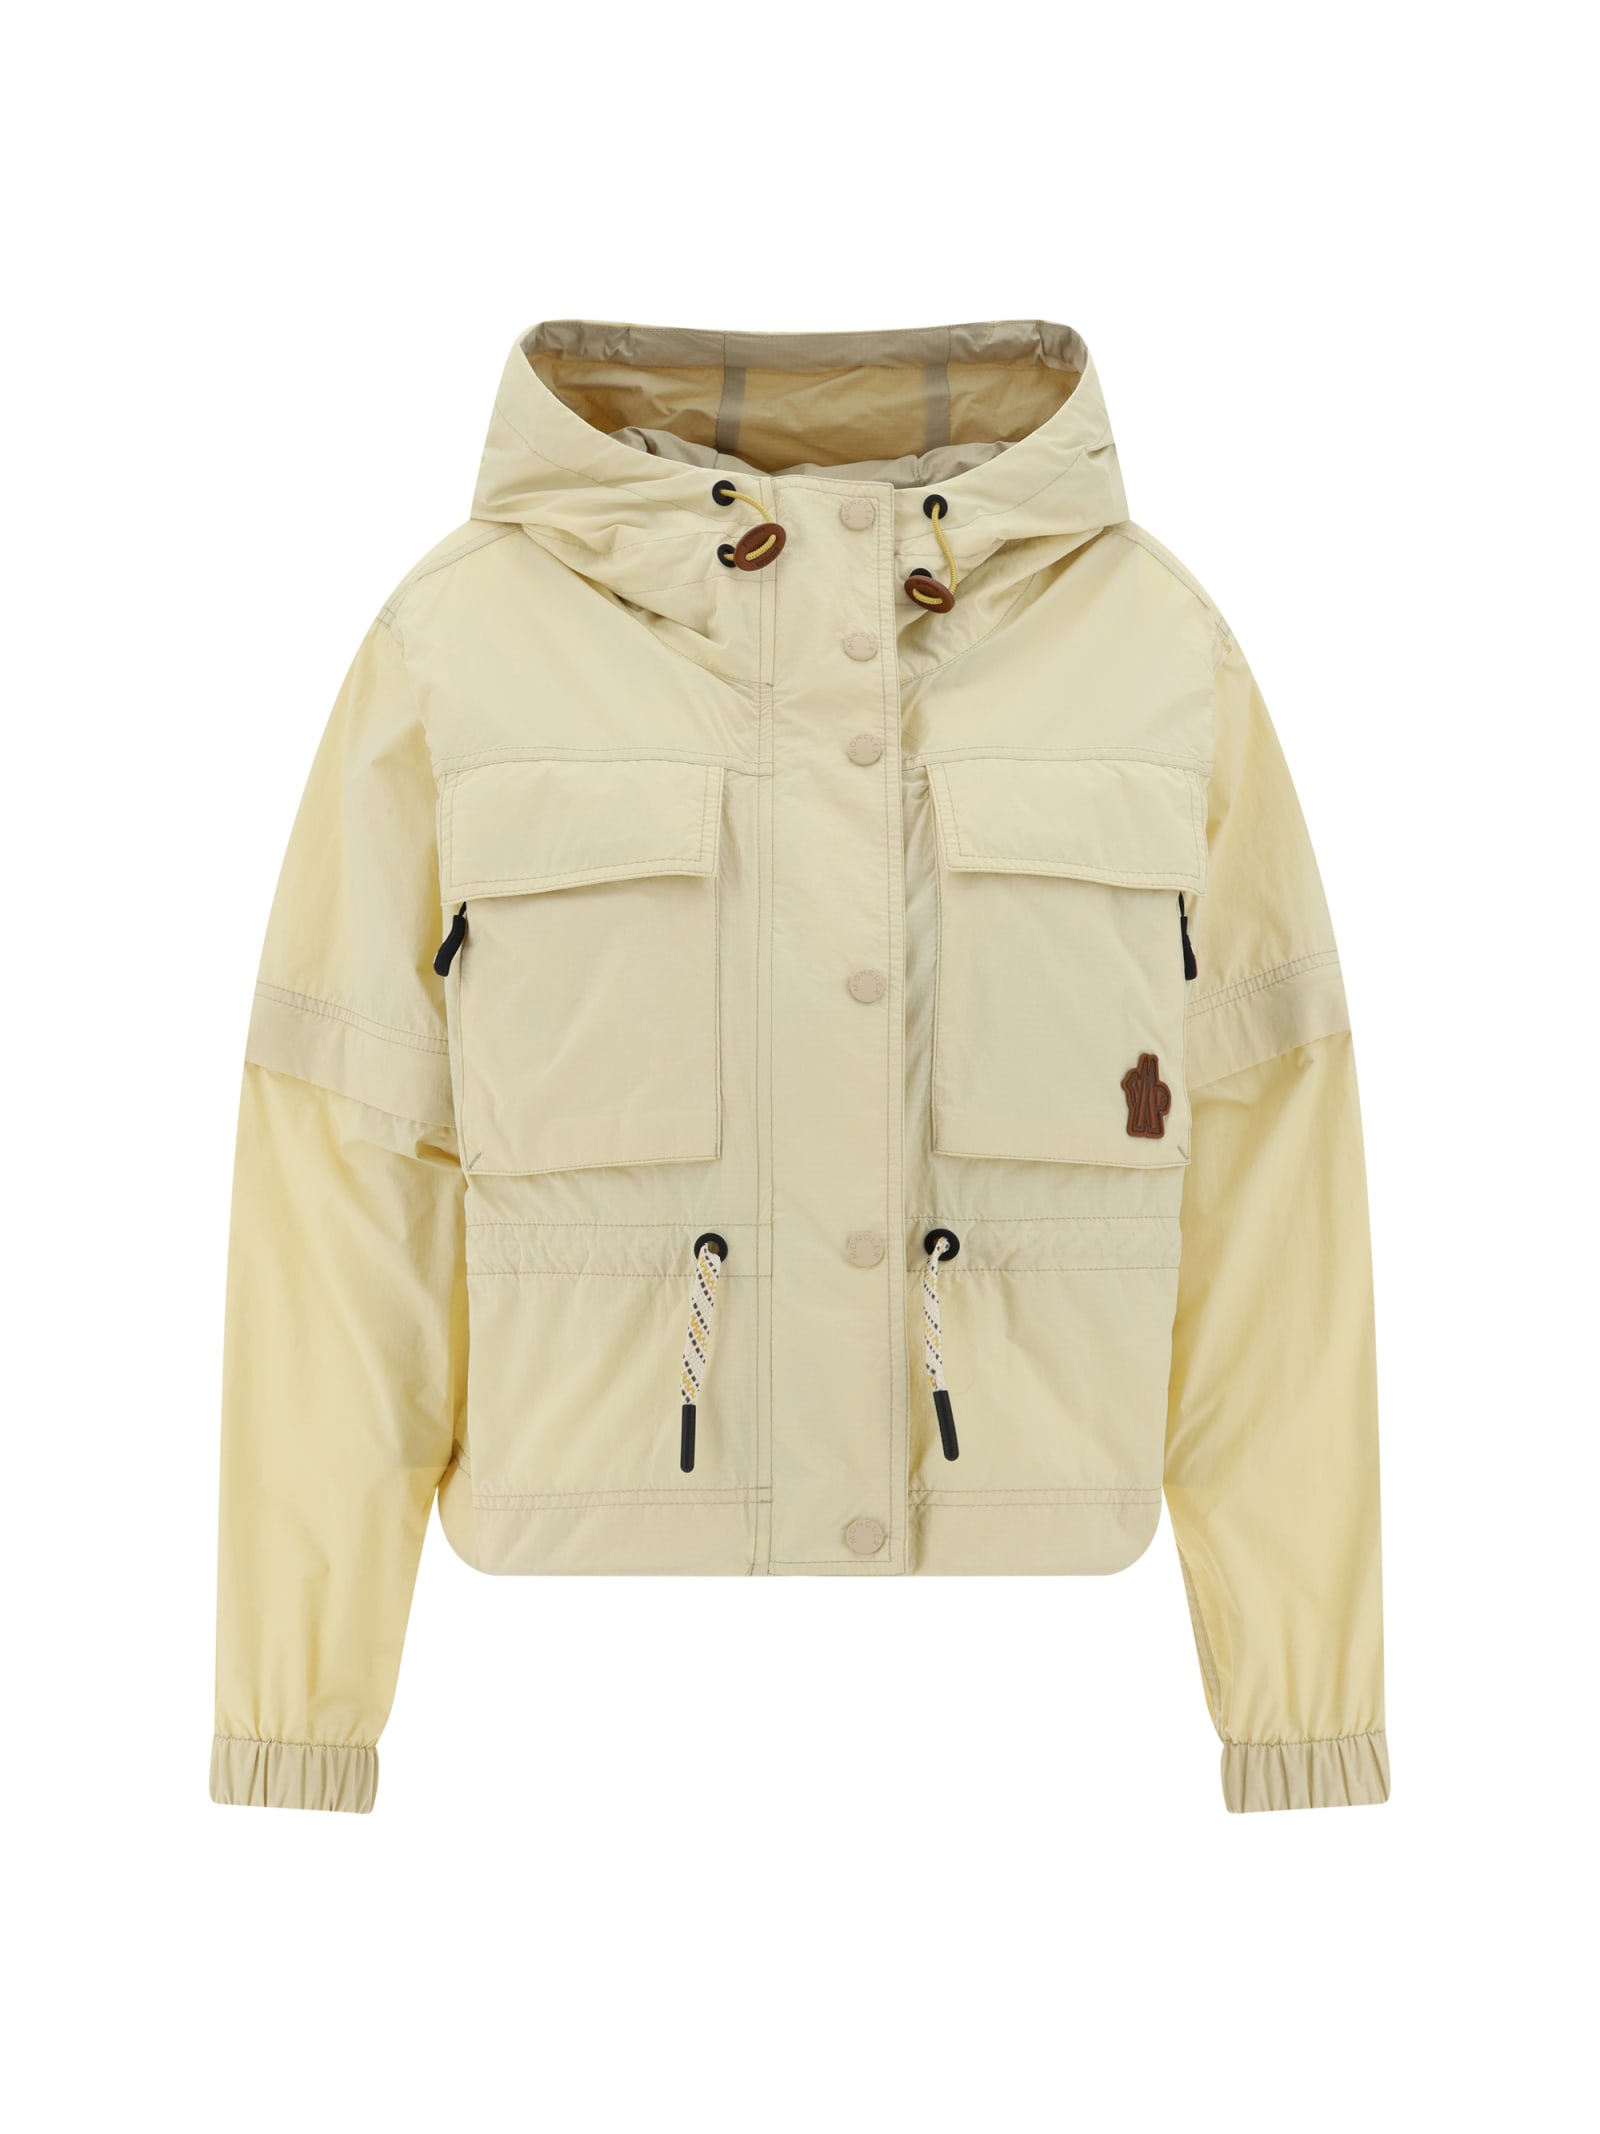 MONCLER LIMOSEE FIELD JACKET